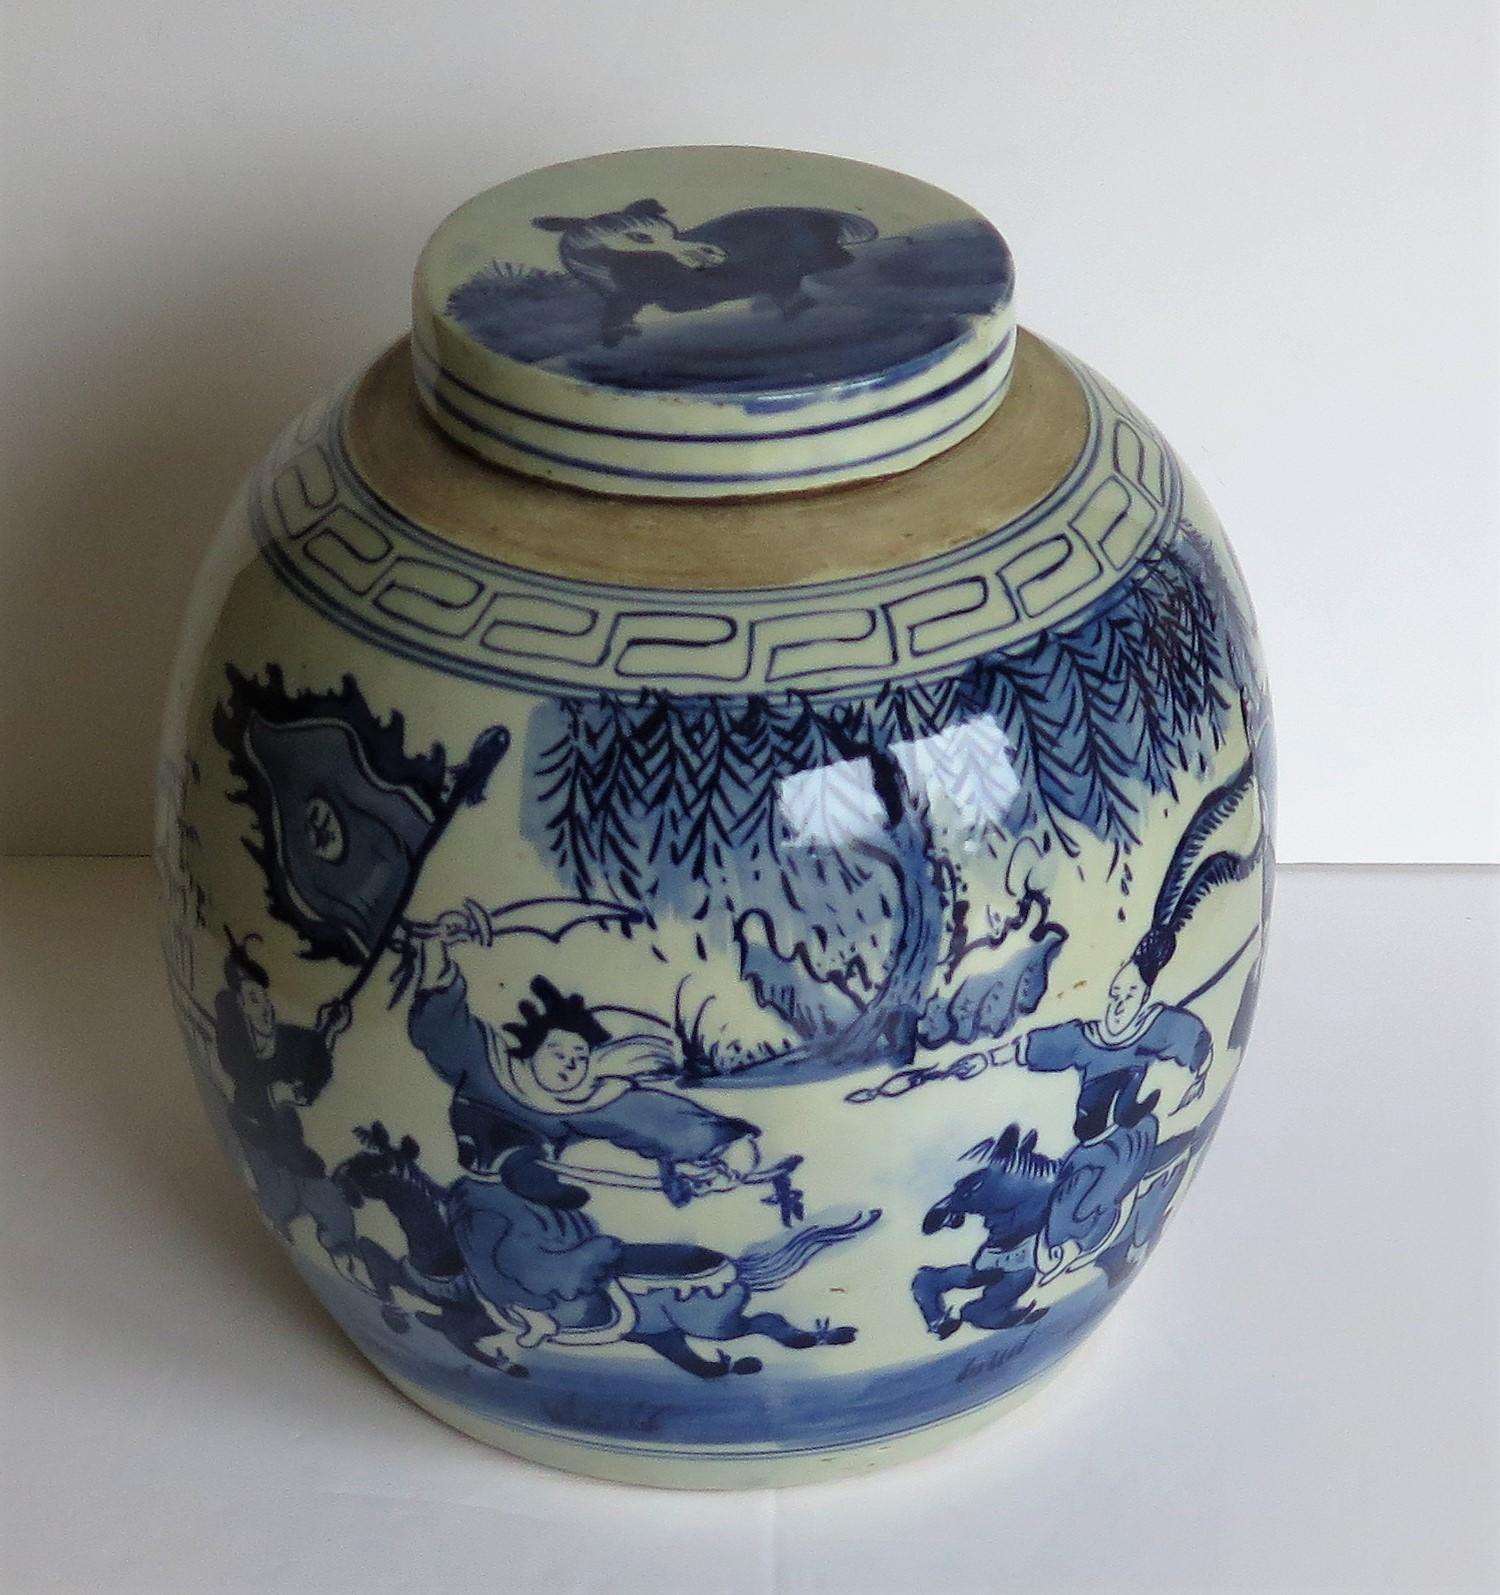 This is a large, very decorative Chinese porcelain blue and white lidded or covered jar with a hand painted scene of warriors fighting on horseback. This jar is Chinese export in the earlier Kangxi period style but dating to the mid-20th